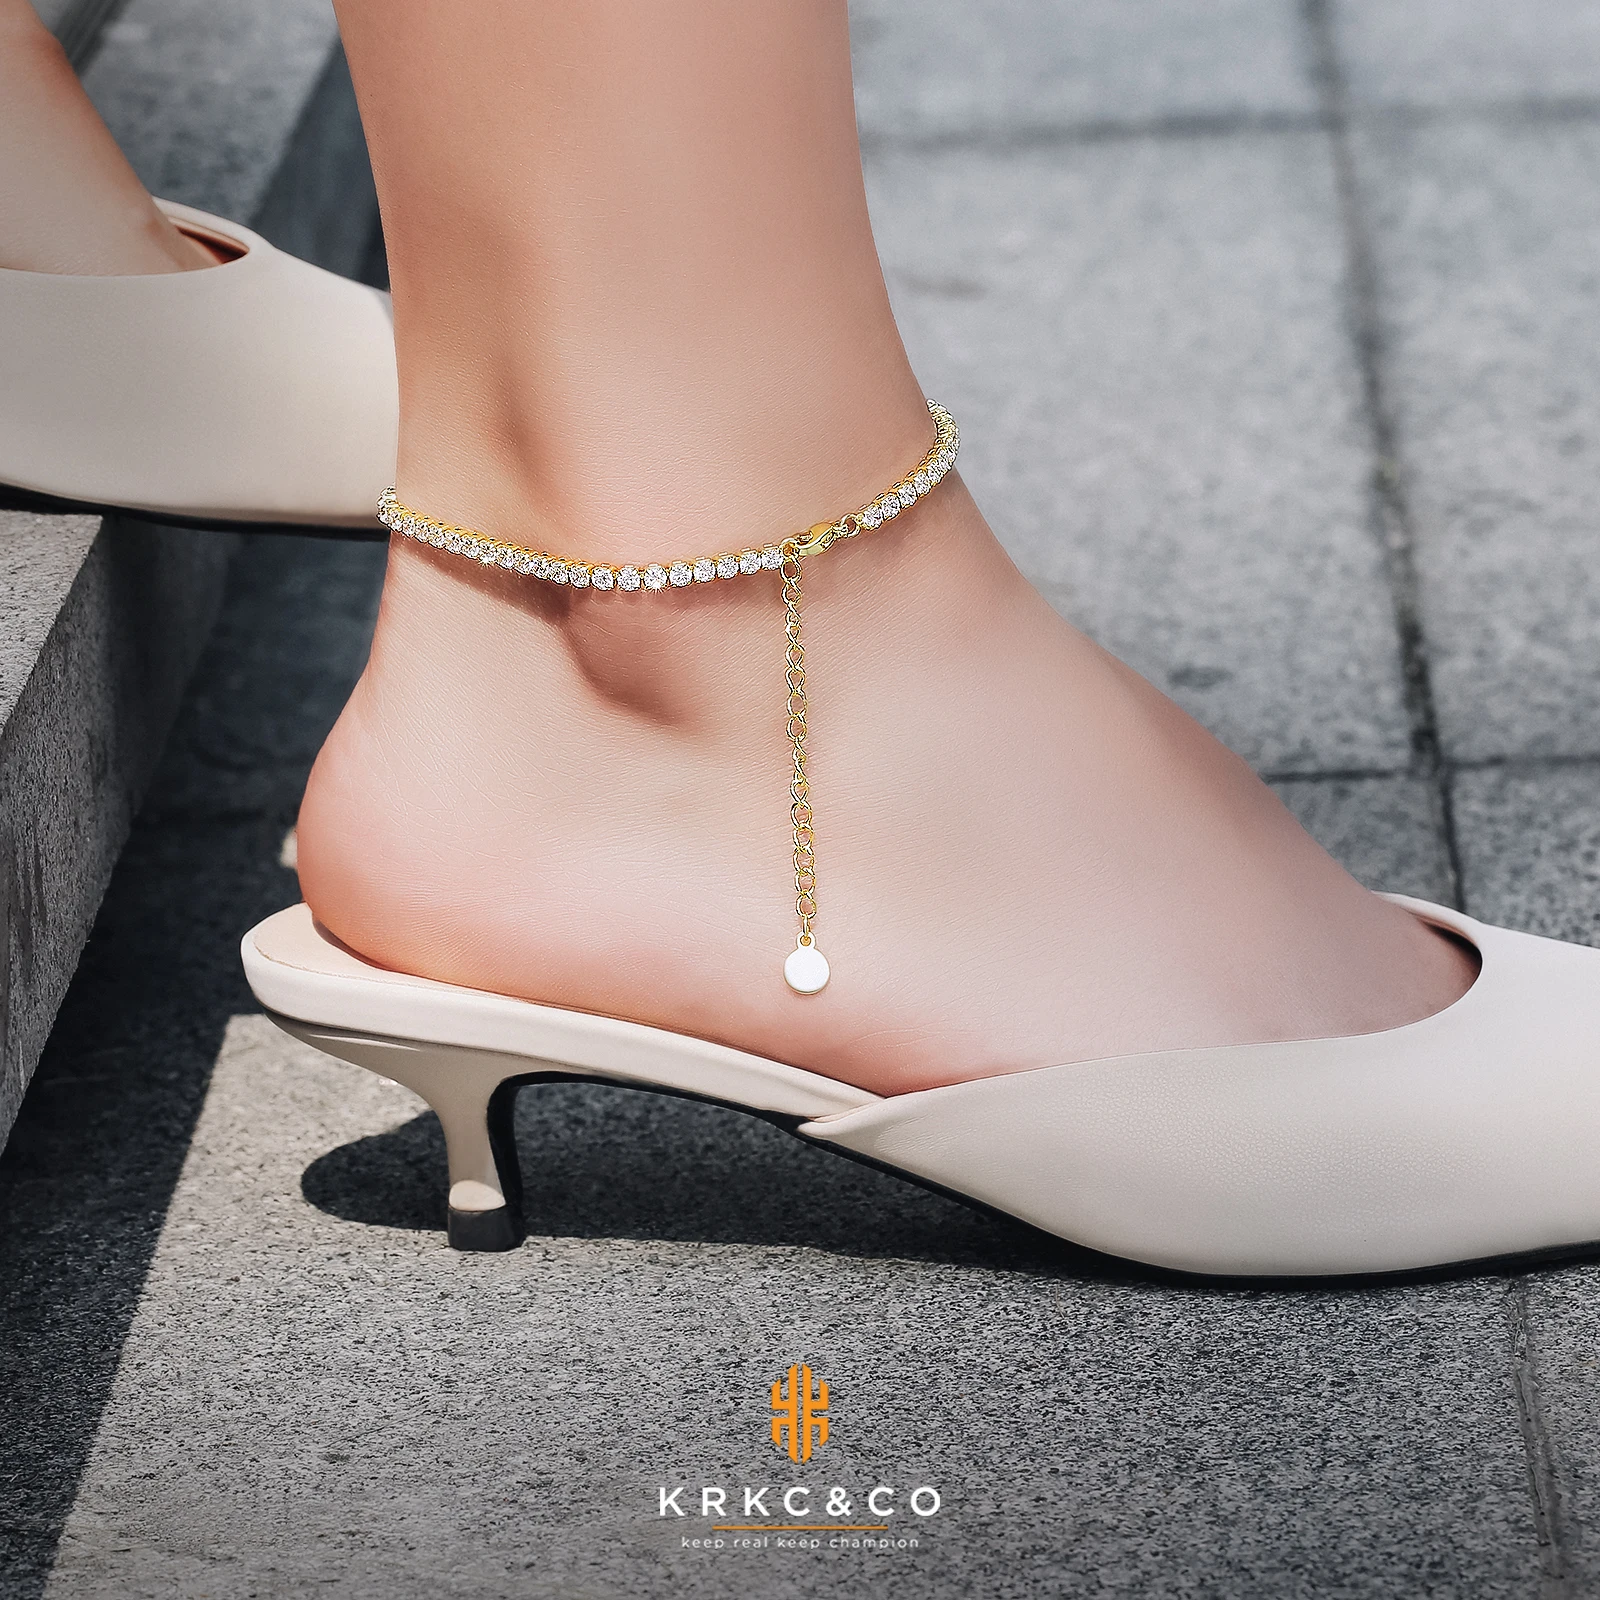 

KRKC 2021 Dainty Jewelry Women Iced Out 3A CZ Anklet Ankle Bracelet Gold Plated Stainless Steel Adjustable Tennis Diamond Anklet, Rose gold/gold/silver